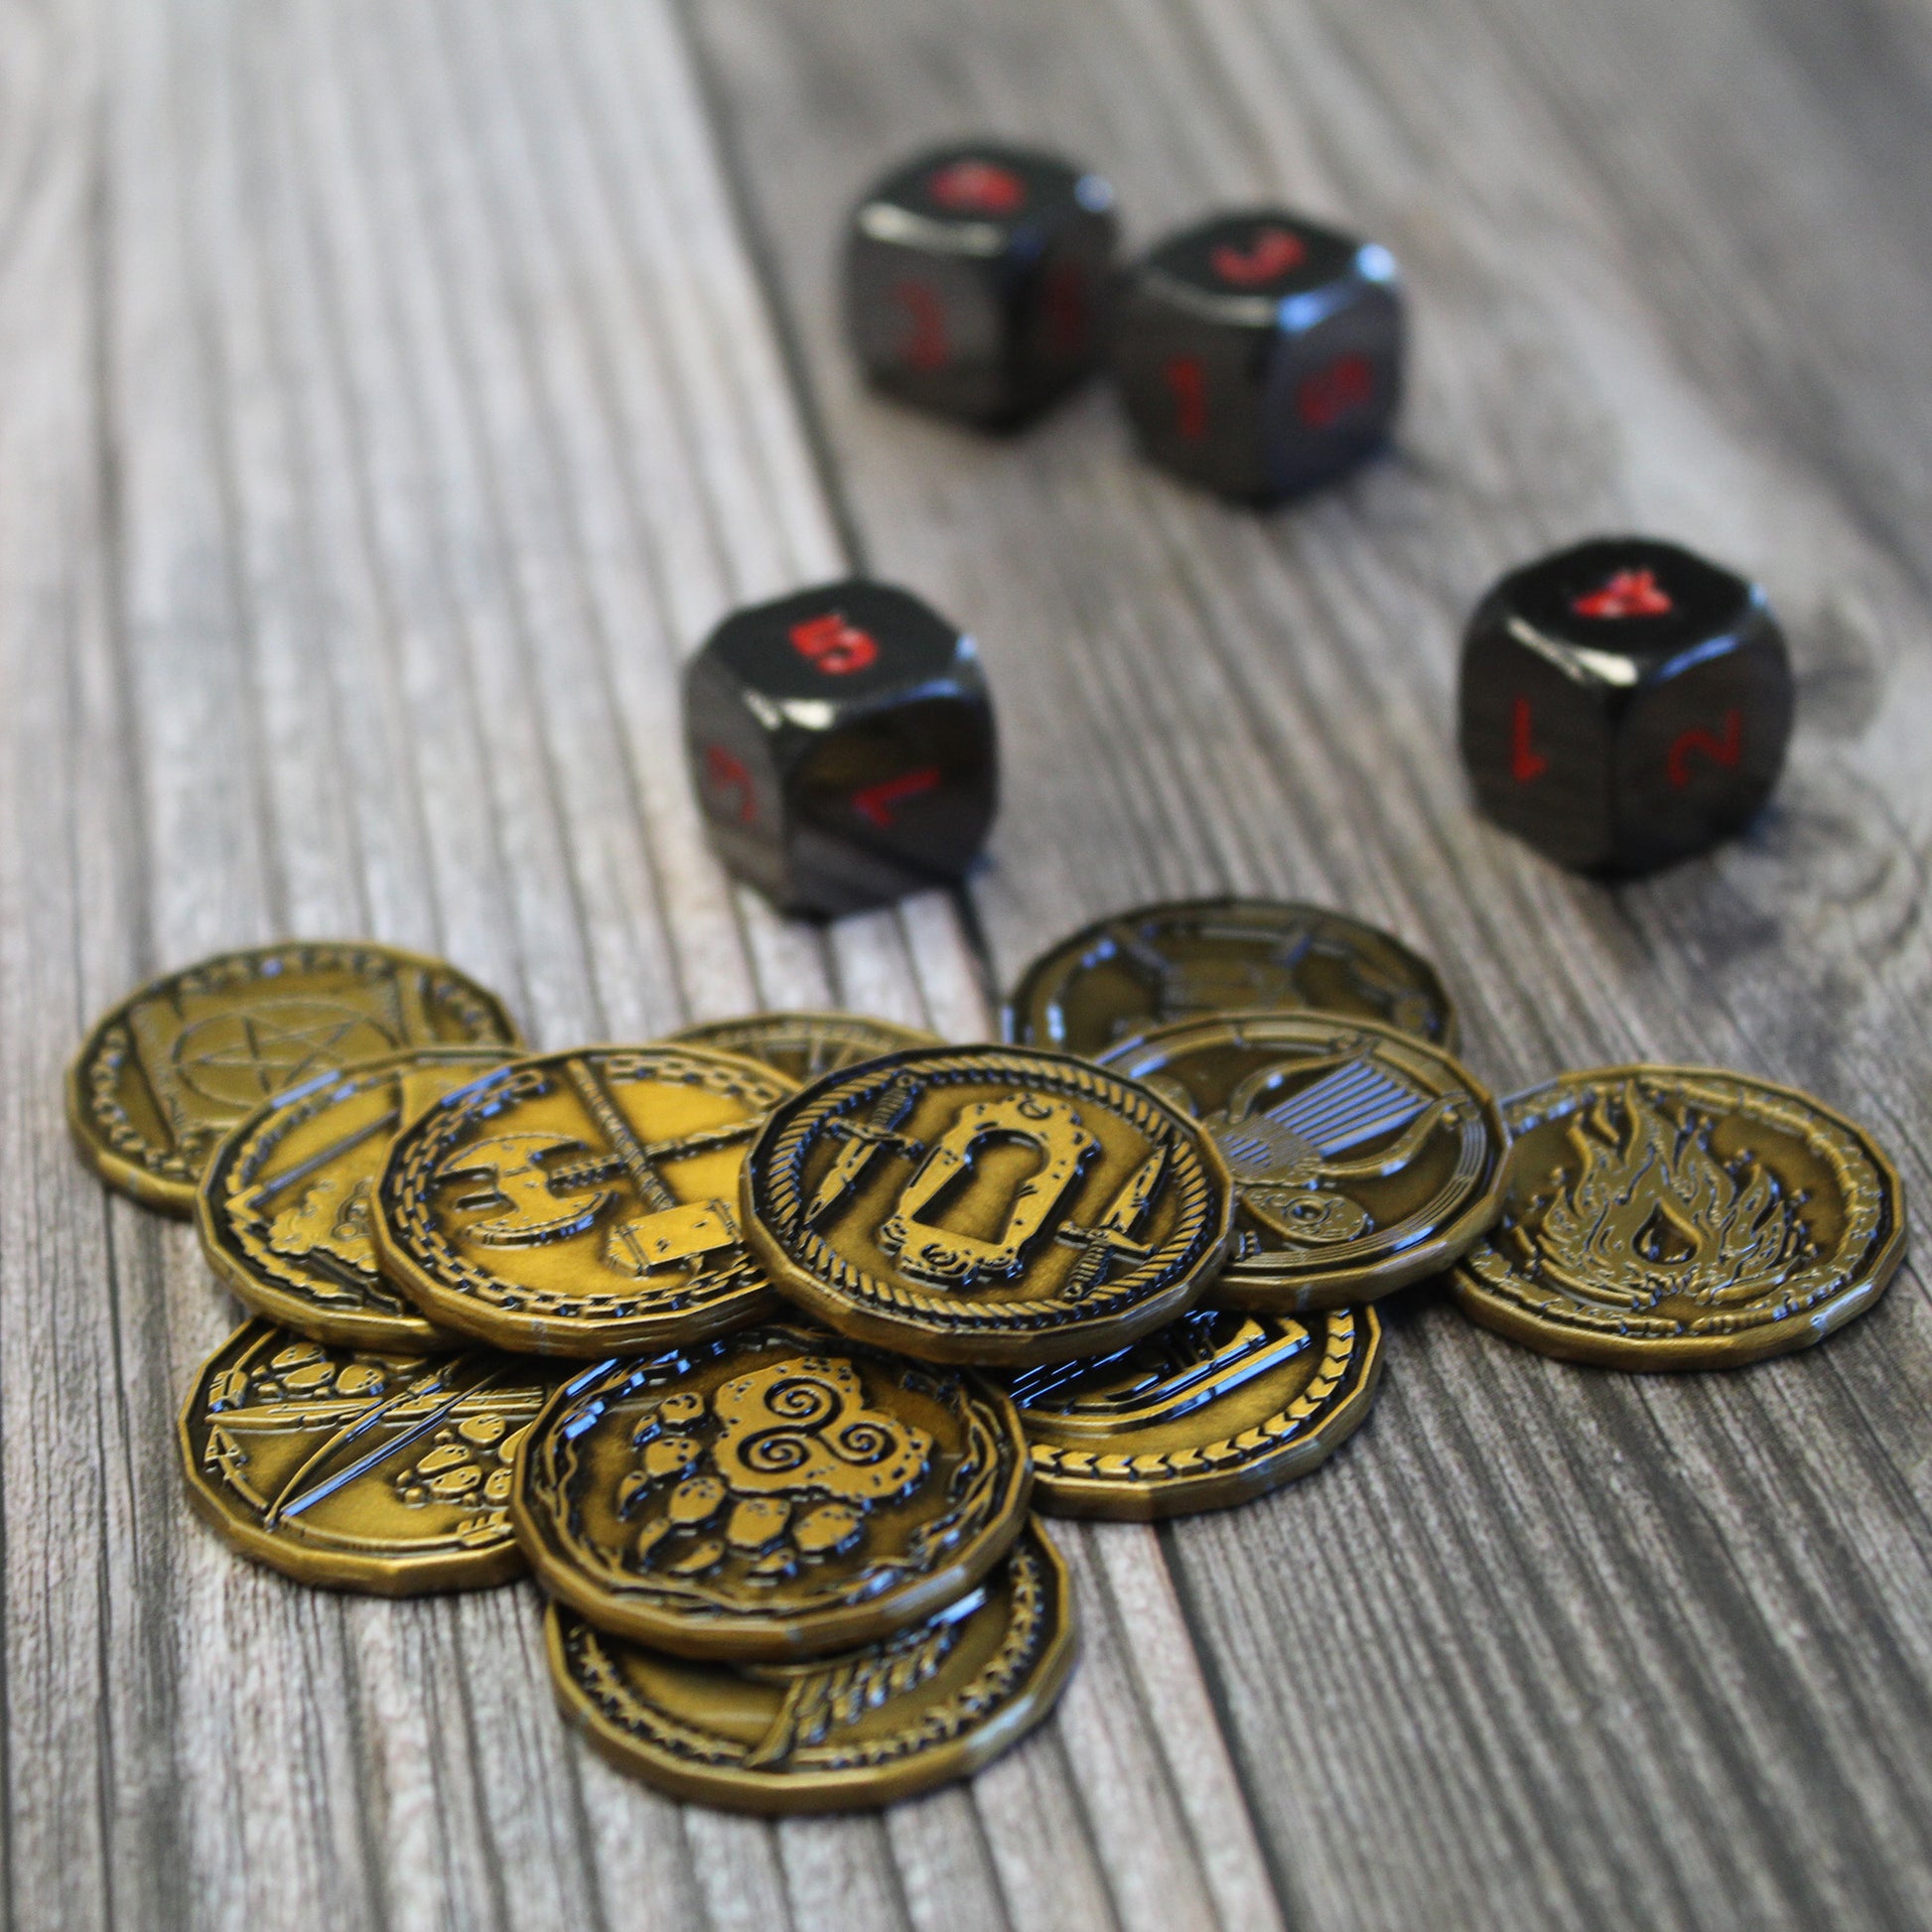 What is the value of a Gold Piece in D&D? 